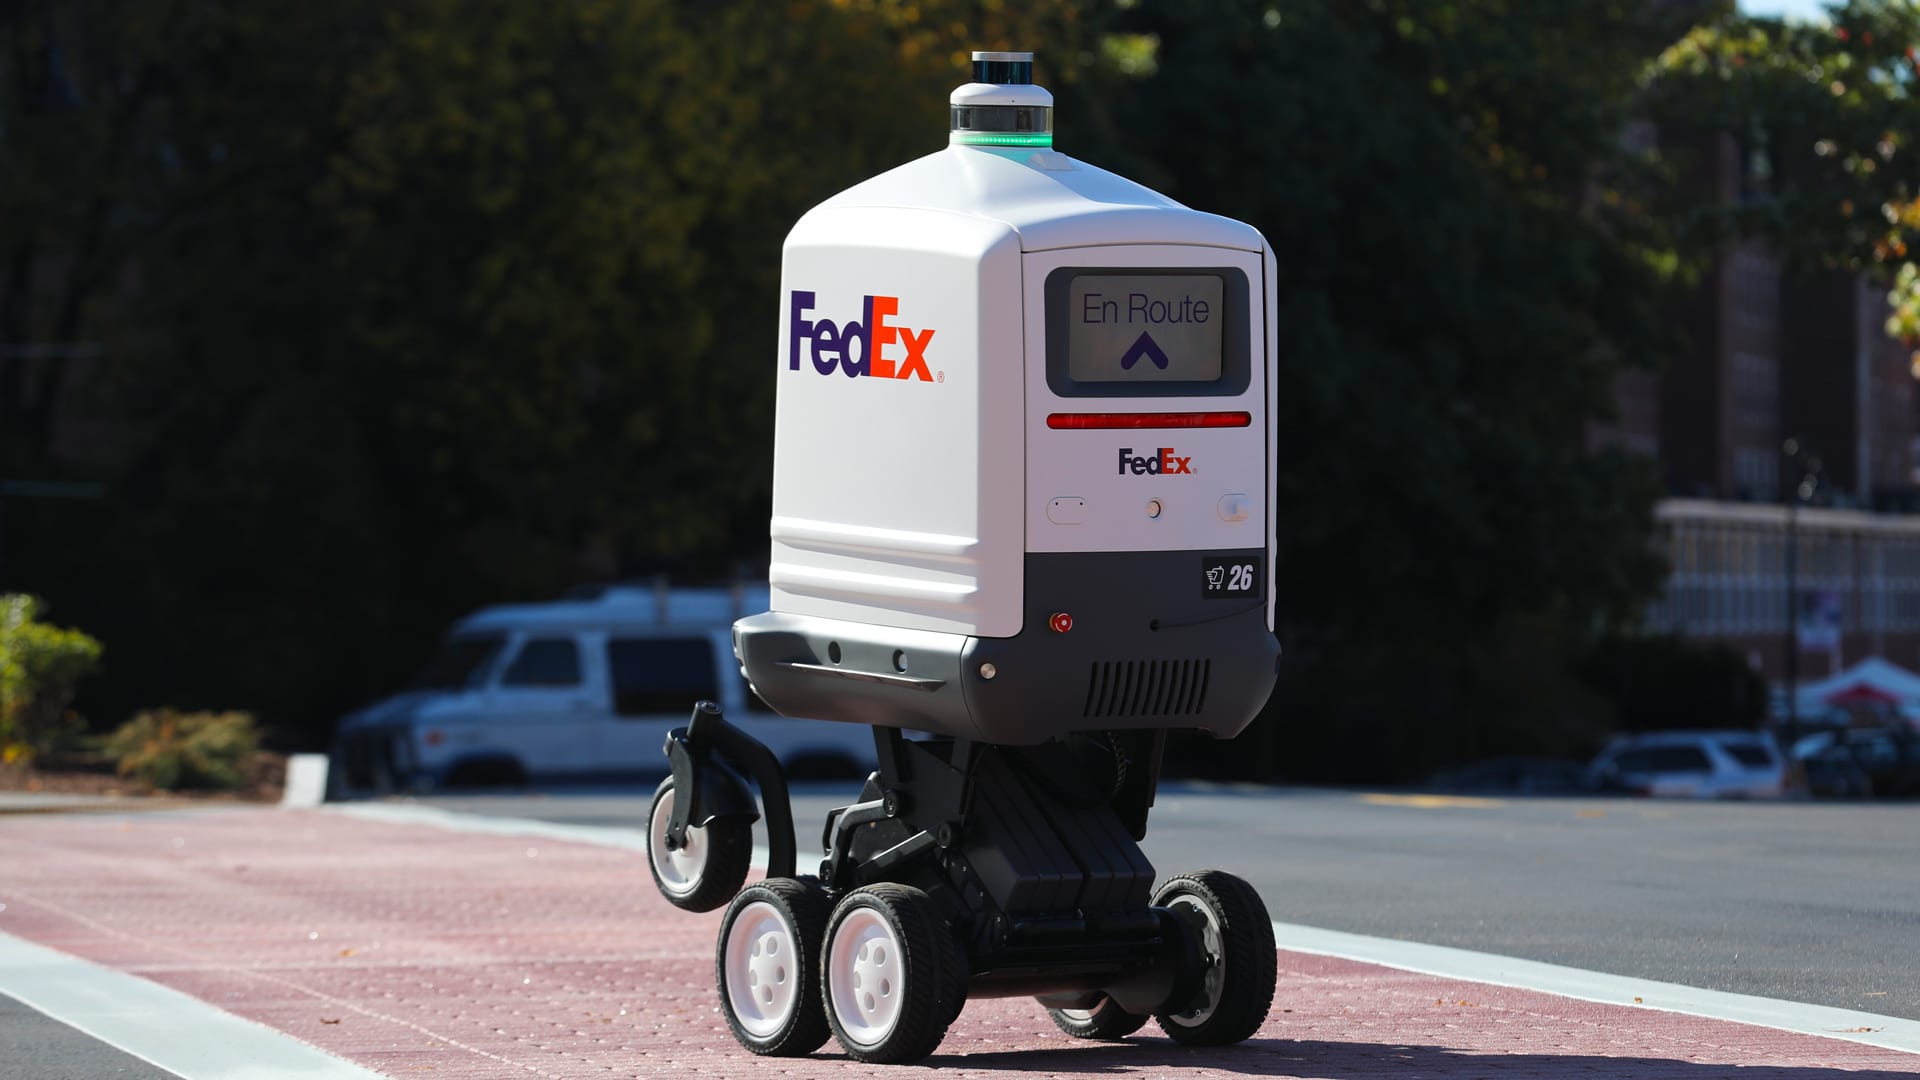 FedEx is upgrading its tech for a holiday season in pandemic times